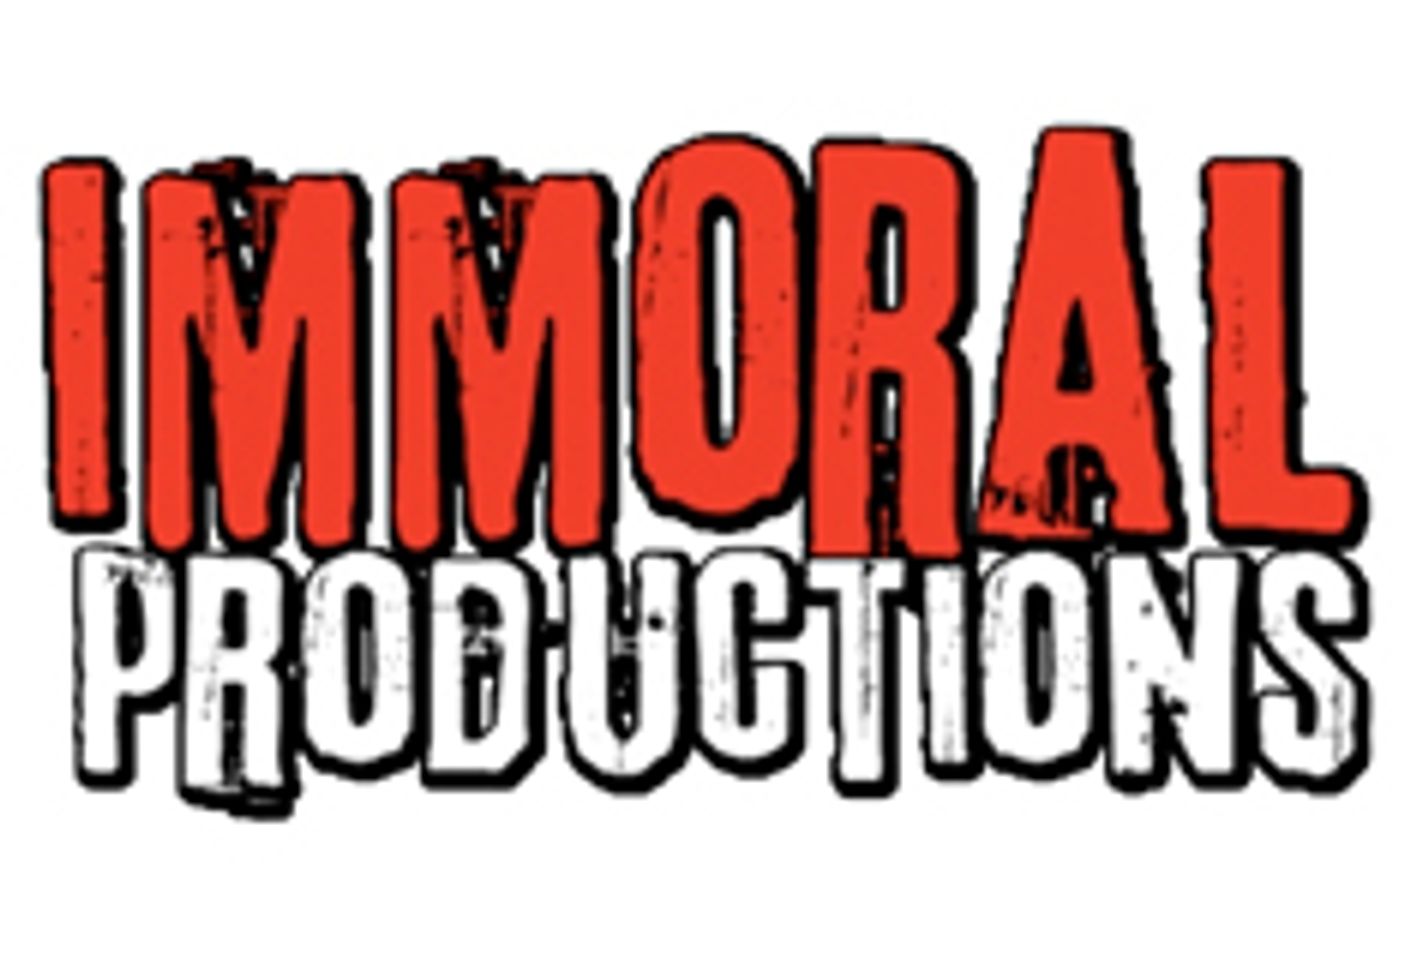 More Live Action From Immoral Productions